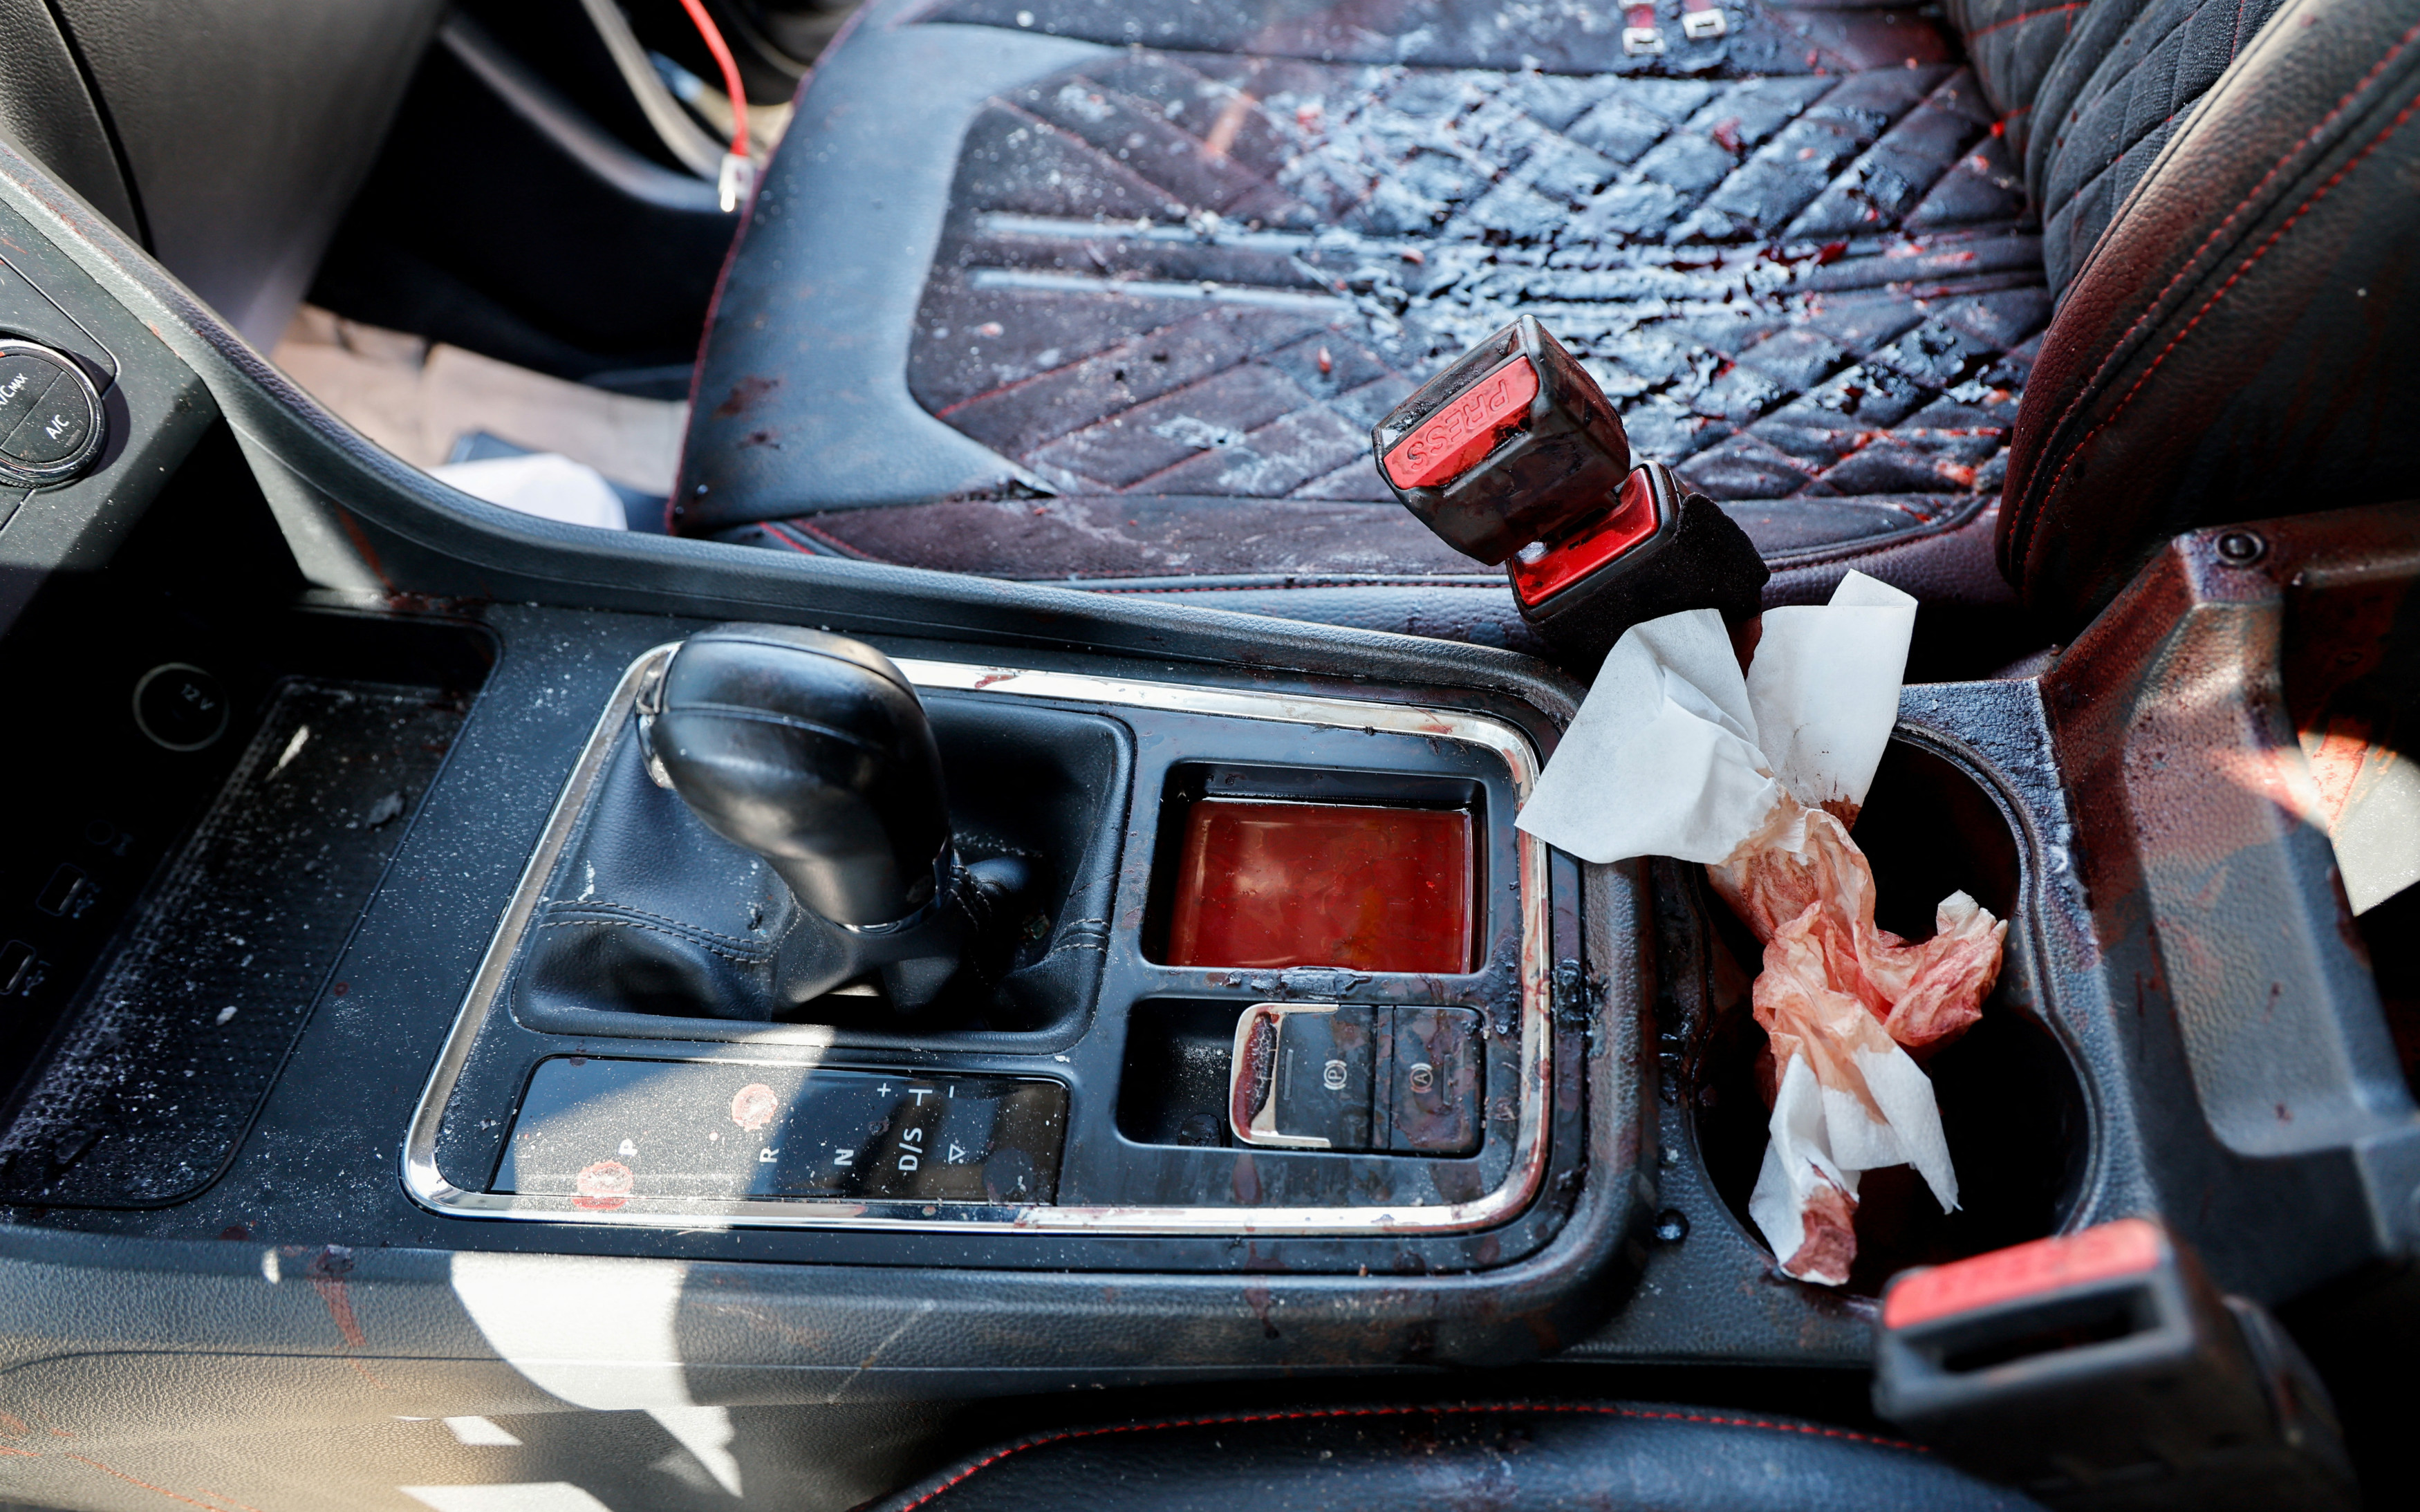 A view of the inside of the car in which an 18-year-old Palestinian was killed by Israeli troops, in Sebastia near Nablus on 22 July 2023 (Reuters)